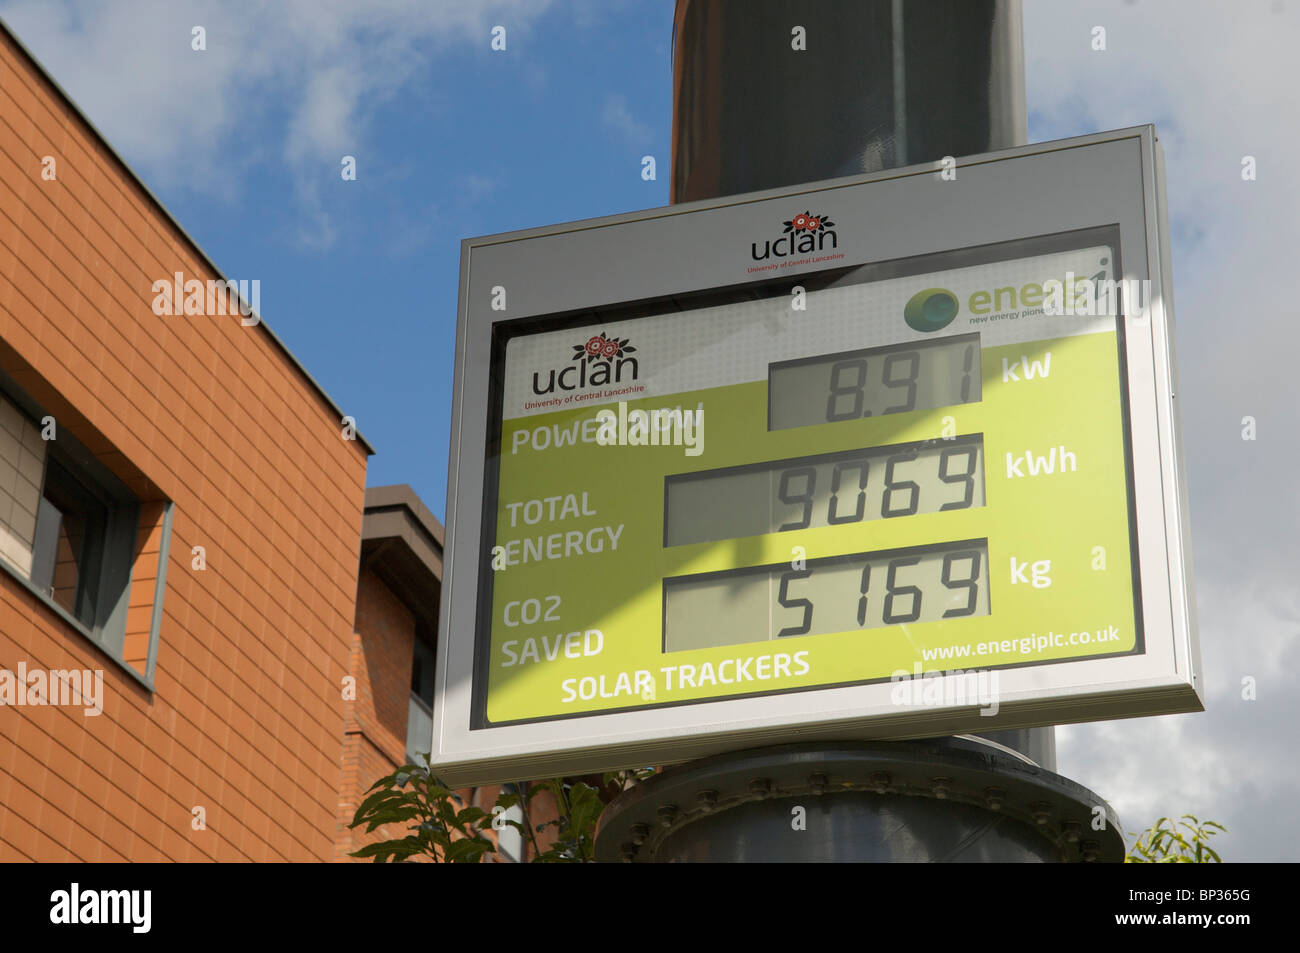 Solar panel meter at the University of central Lancashire,  showing amount of CO2 saved Stock Photo